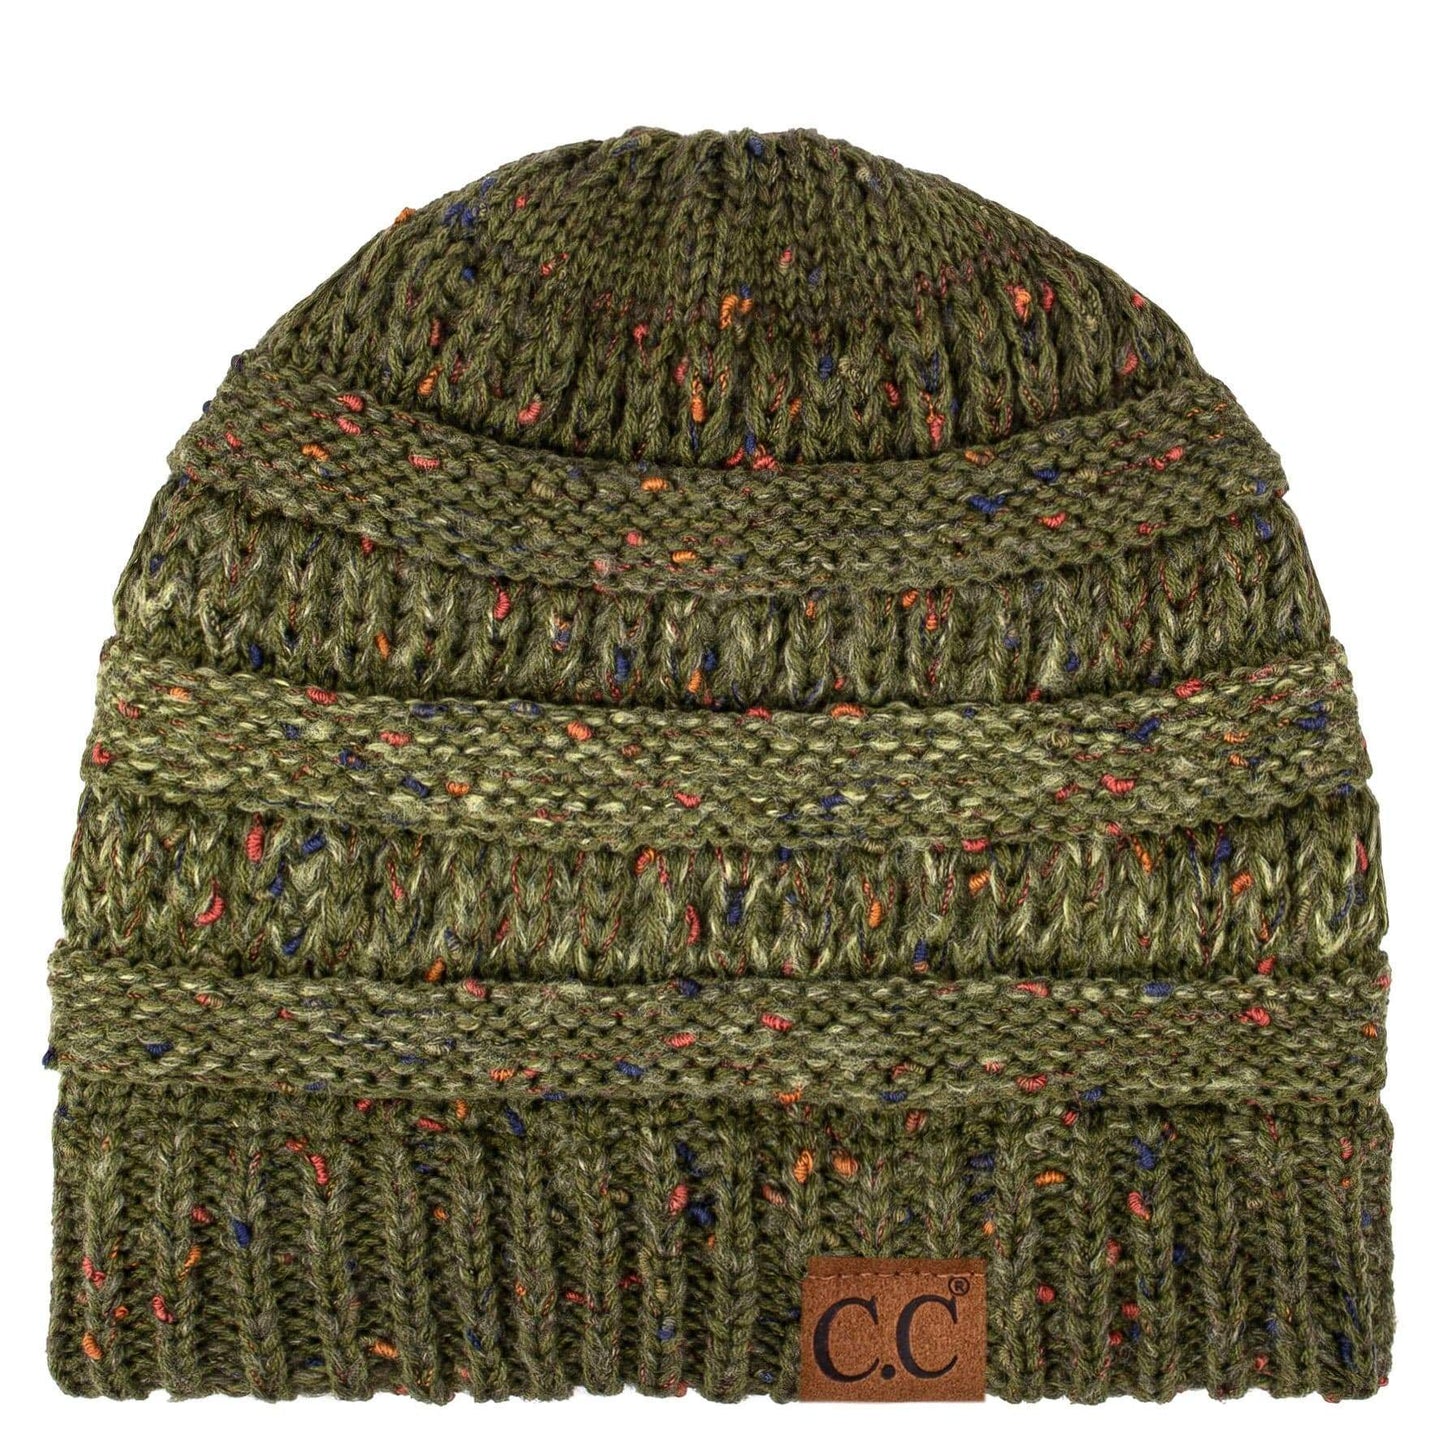 C.C Apparel Ombre Sage C.C Trendy Warm Chunky Soft Stretch Ombre Cable Knit Beanie Skully